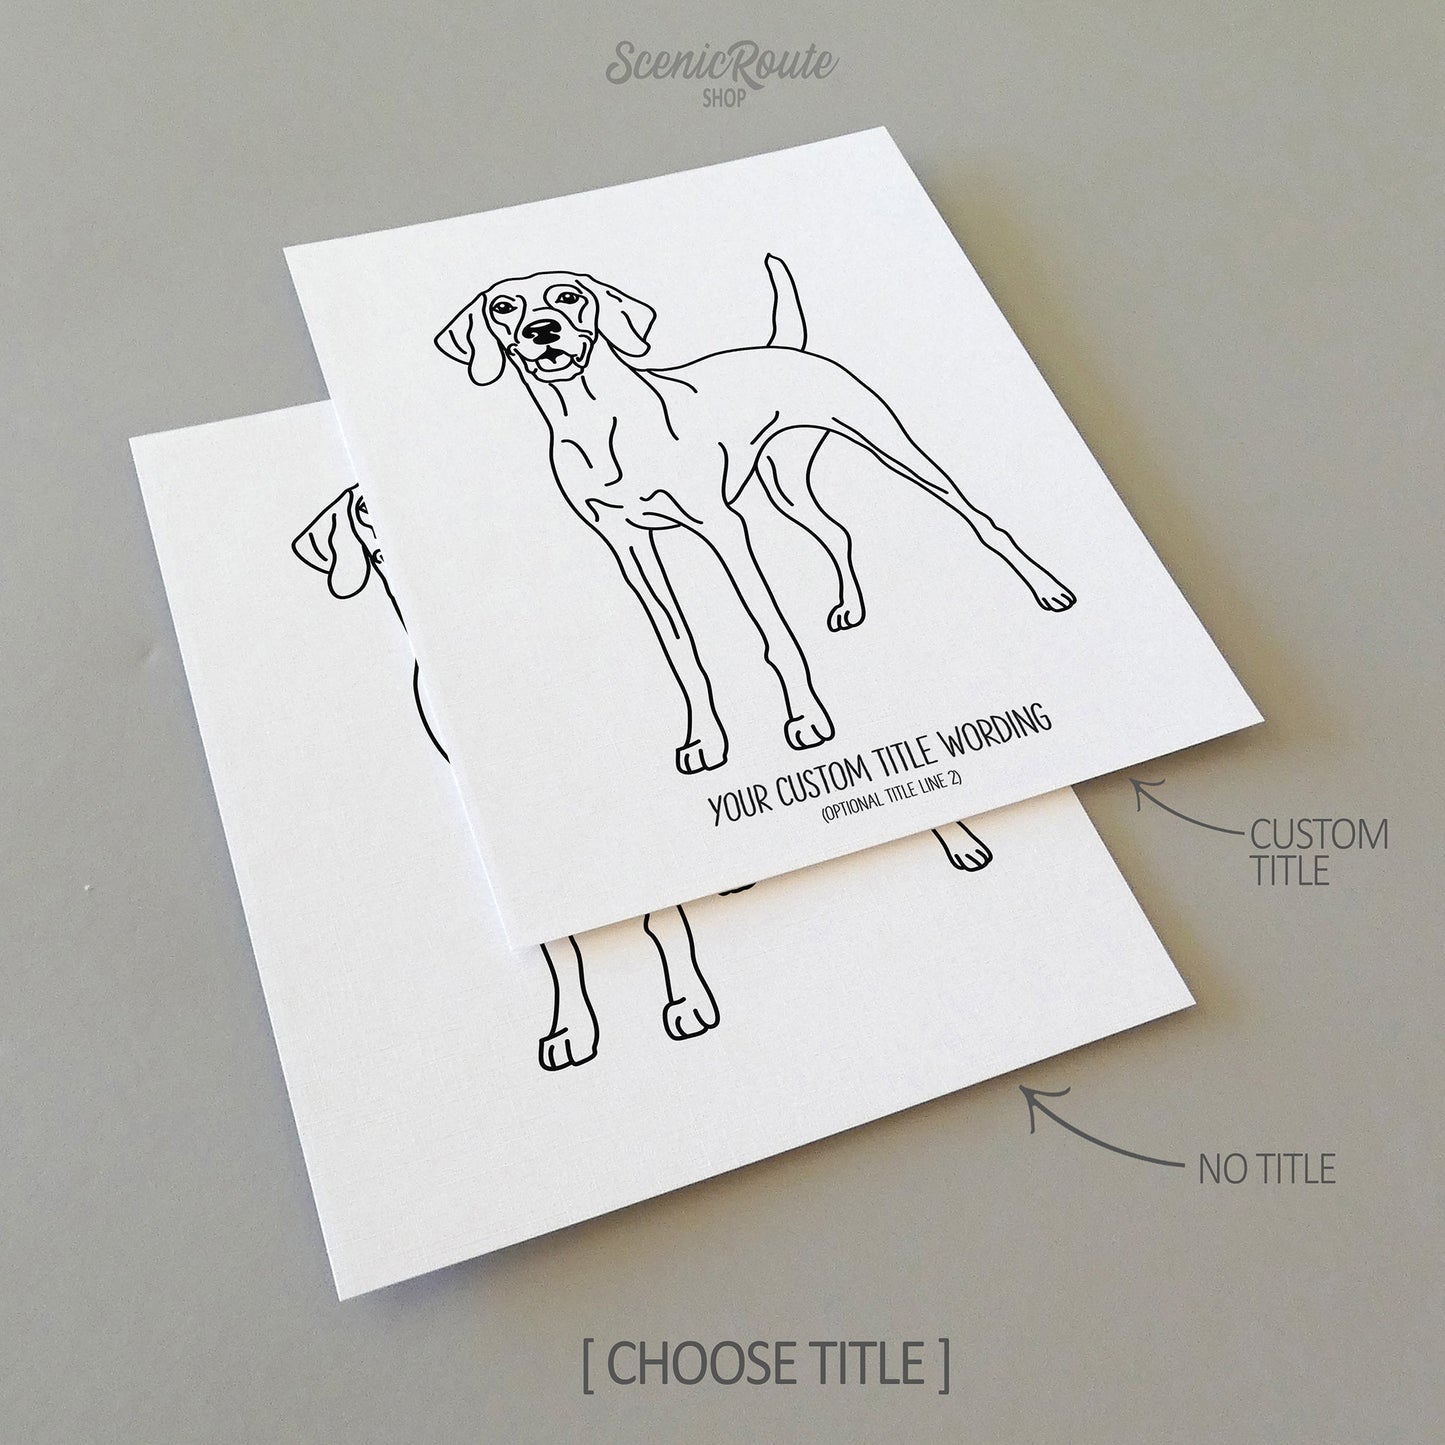 Two line art drawings of a Vizsla dog on white linen paper with a gray background.  The pieces are shown with “No Title” and “Custom Title” options for the available art print options.